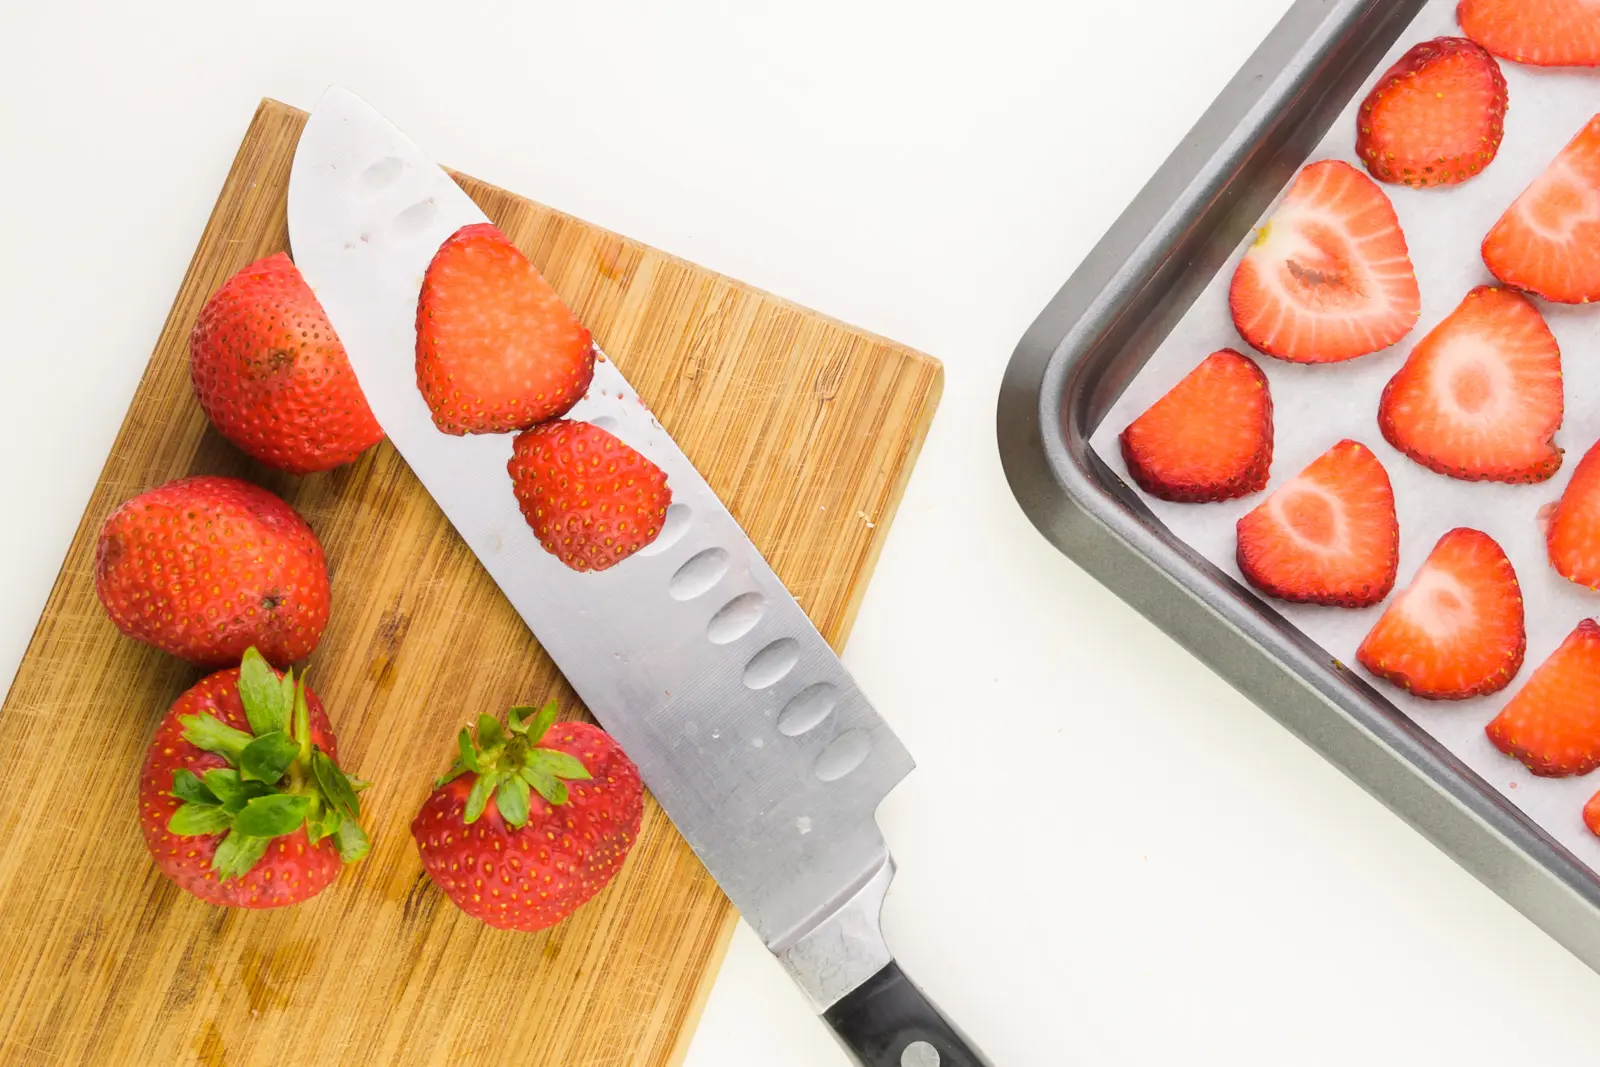 A knife sits on a cutting board with several fresh and sliced strawberries. A pan sits nearby with sliced strawberries in it.